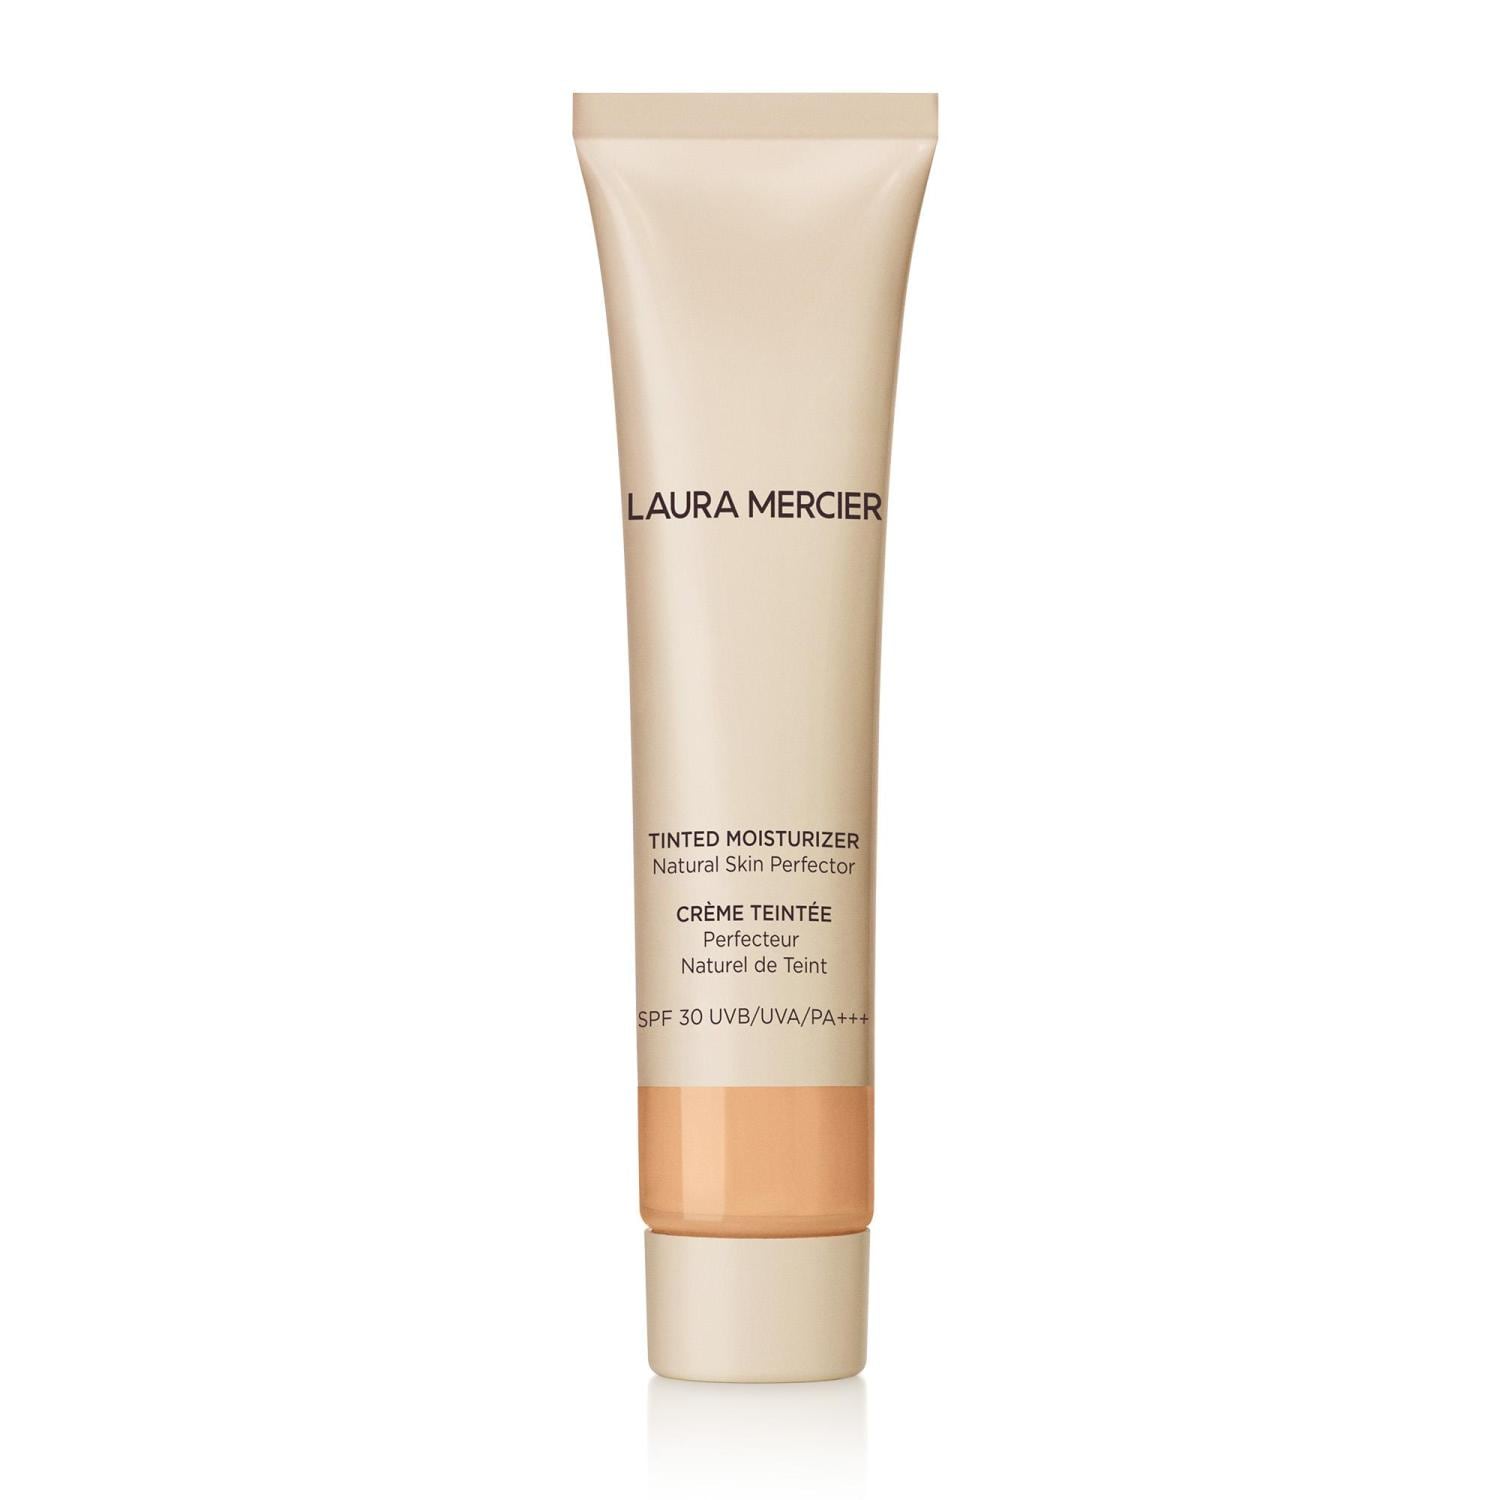 Laura Mercier Beauty To Go Travel Size - Tinted Moisturizer Natural Skin Perfector SPF 30, No. 1W1 - PORCEL